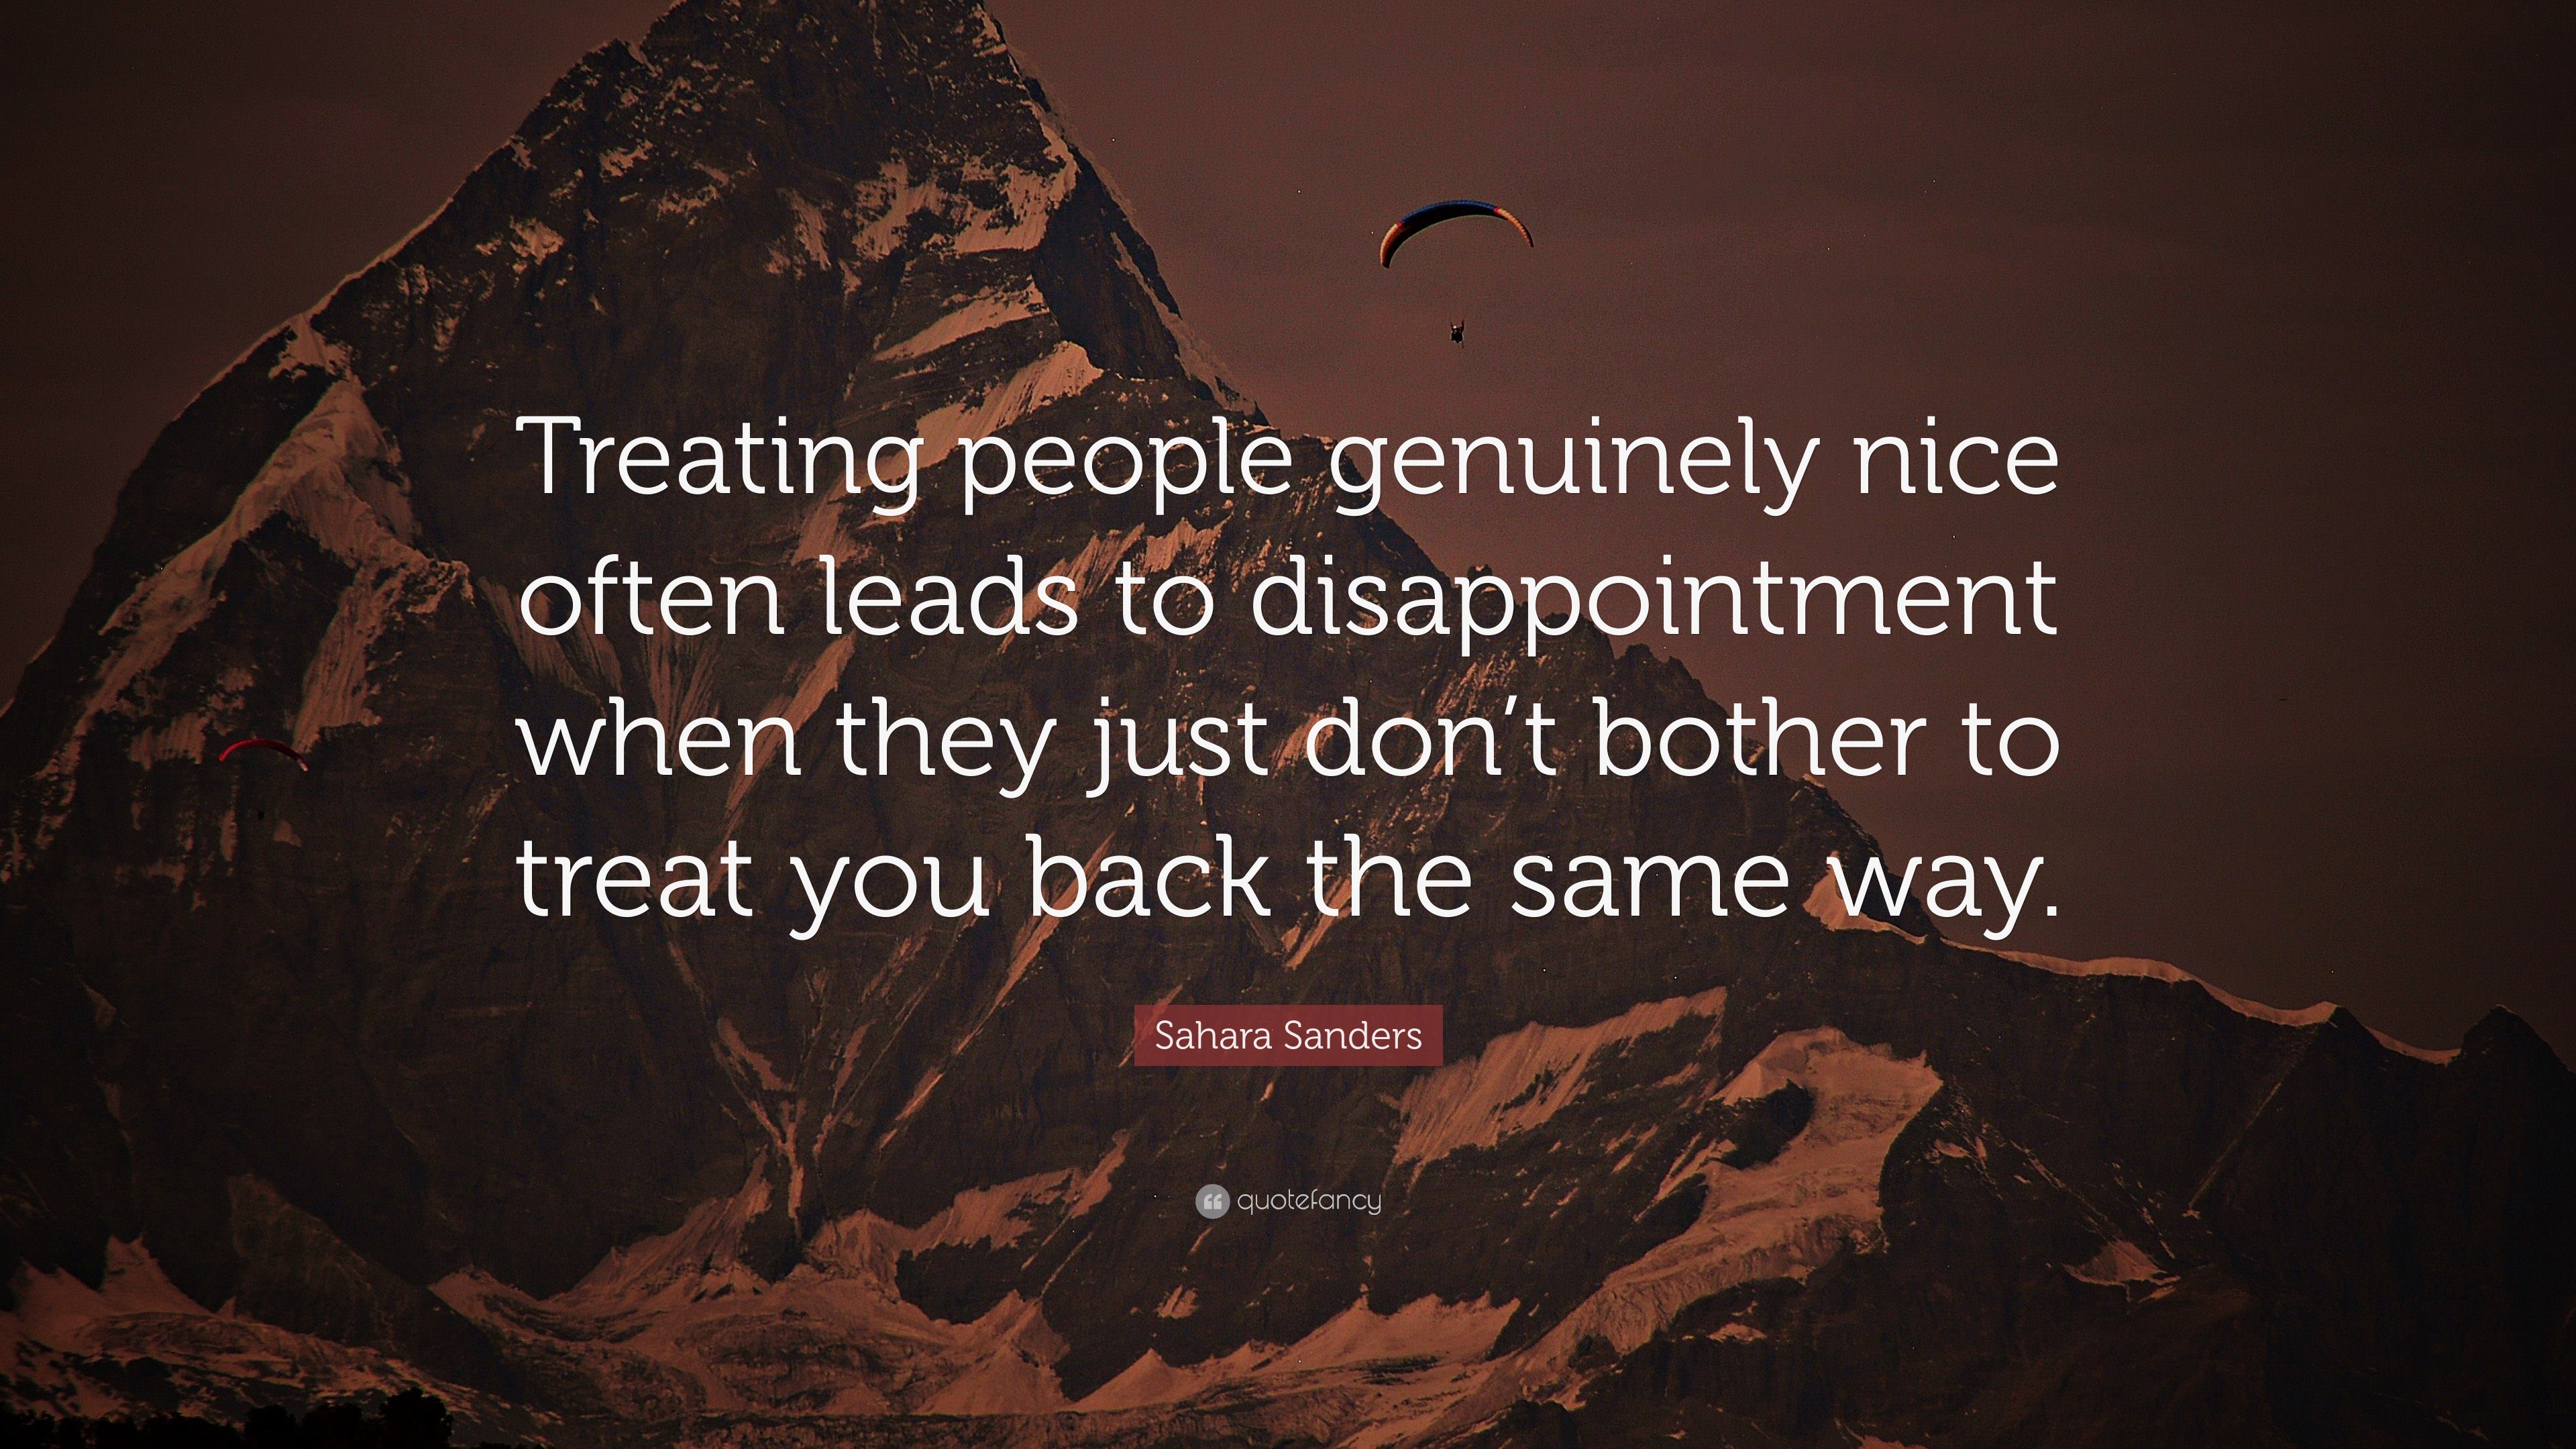 Sahara Sanders Quote: “Treating people genuinely nice often leads to ...